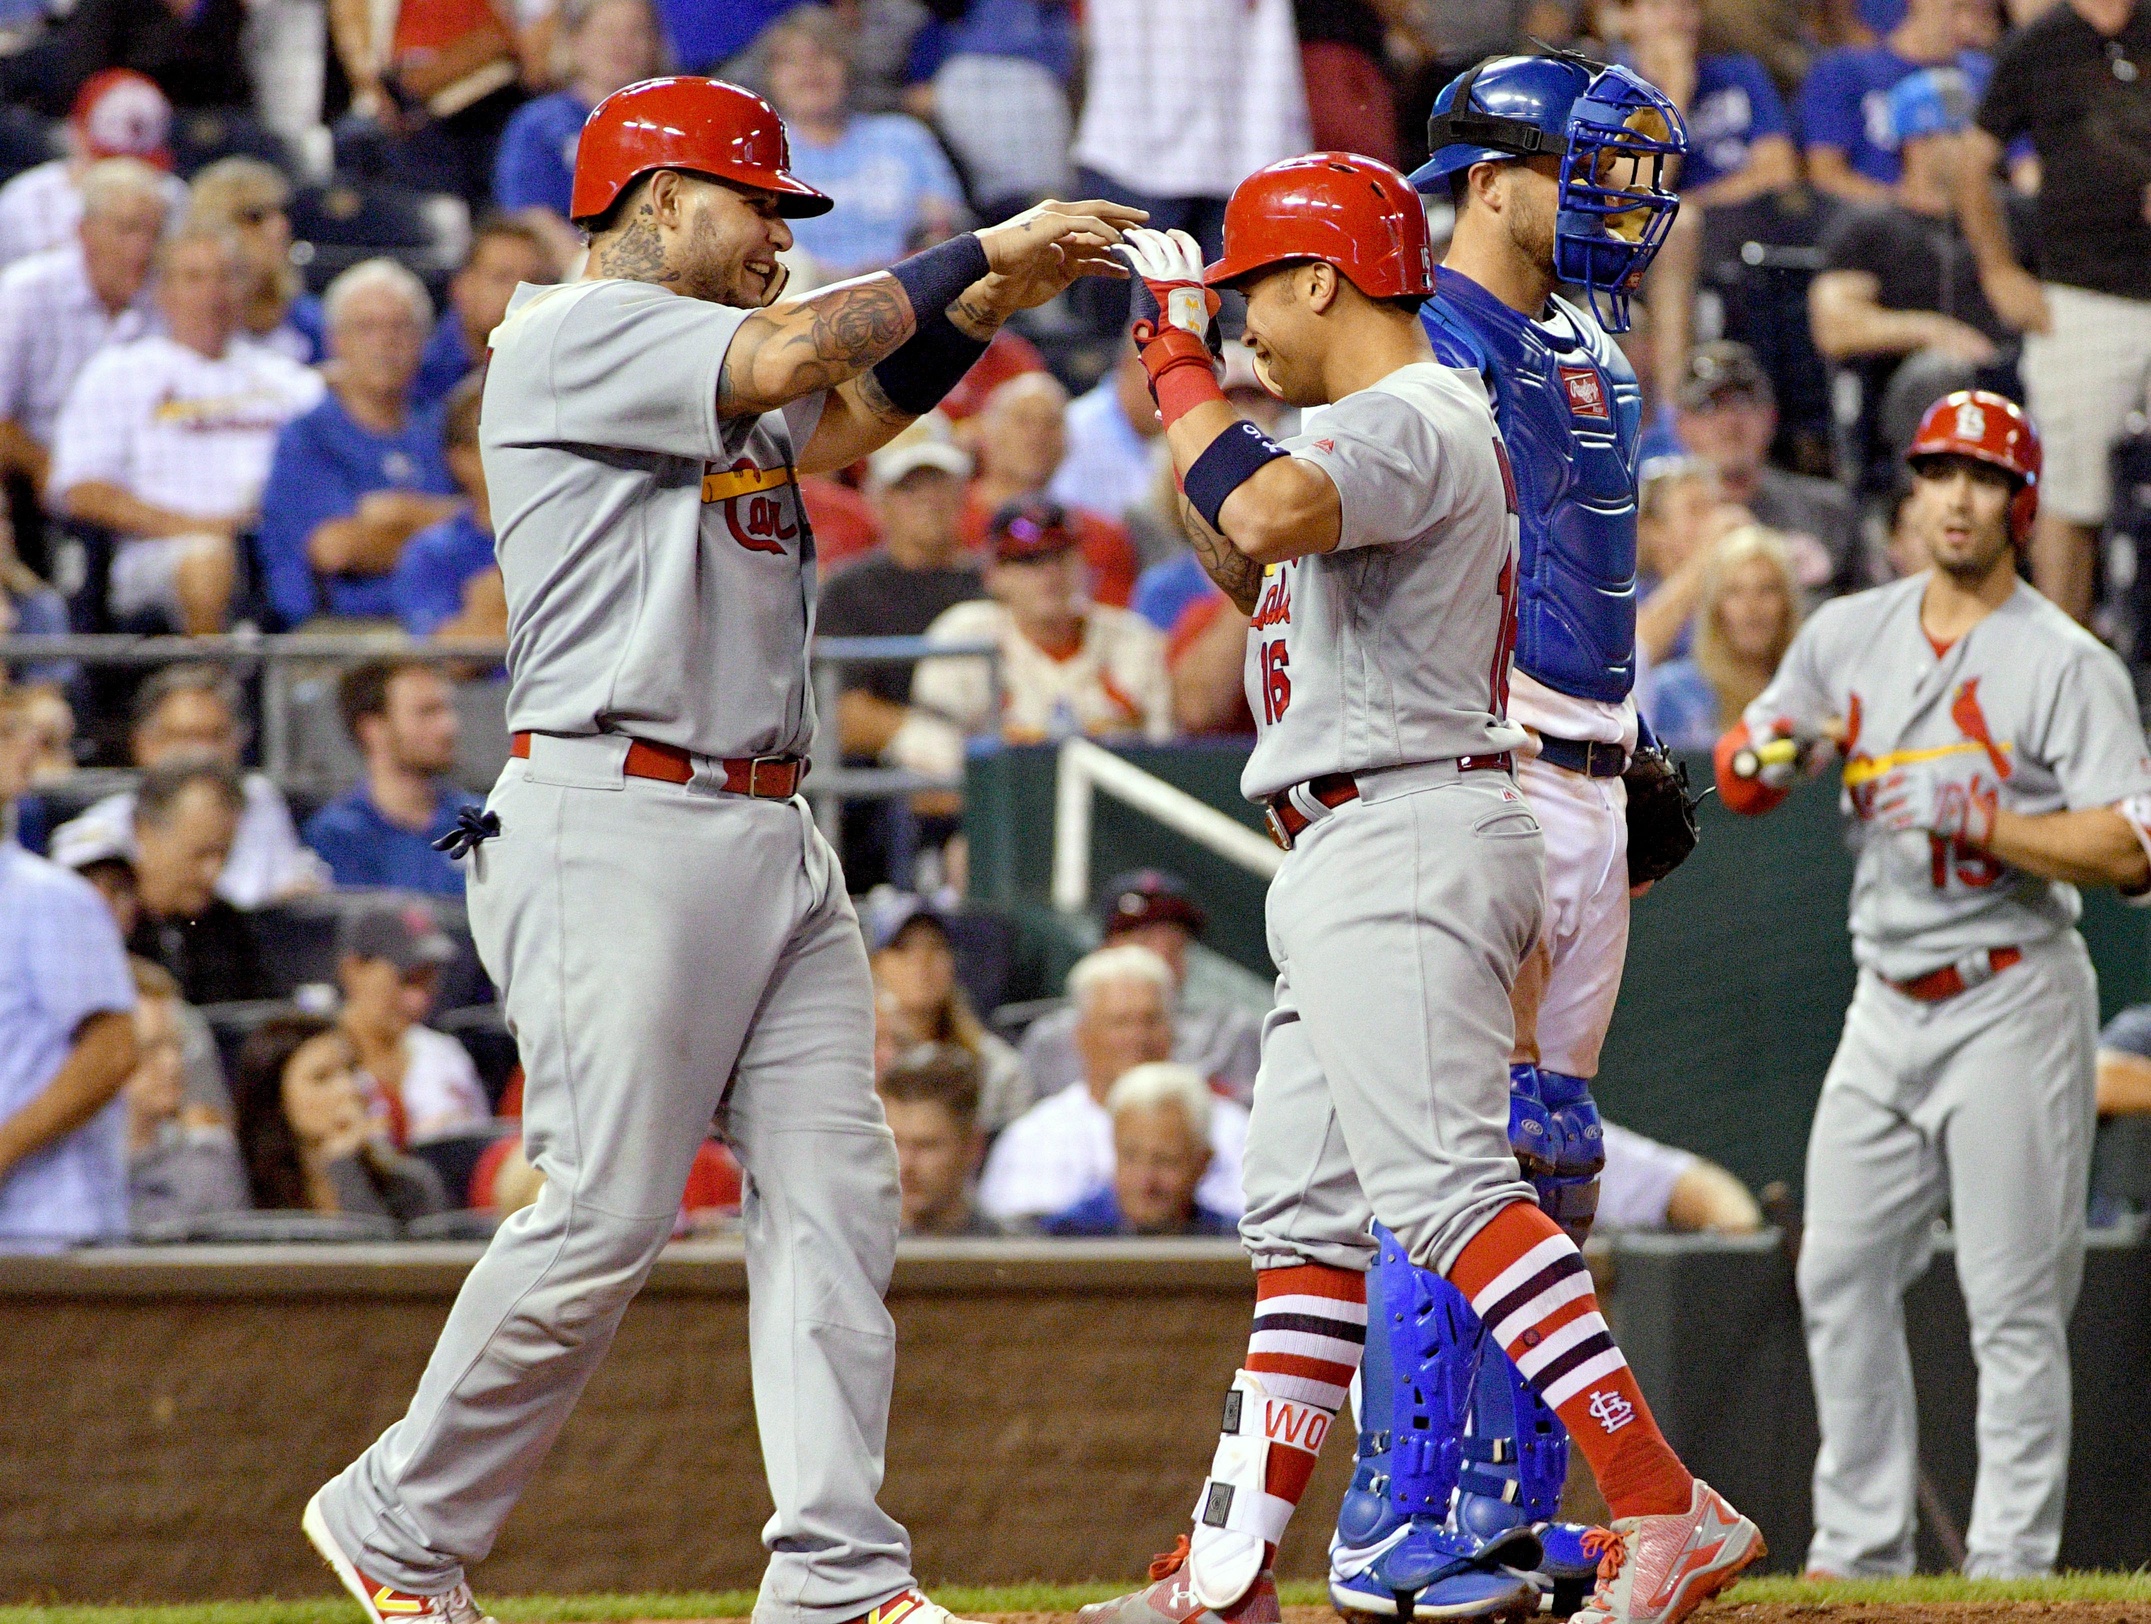 Aug 7, 2017; Kansas City, MO, USA; St. Louis Cardinals second baseman Kolten Wong (16) is congratulated by catcher Yadier Molina (4) after hitting a two run home run in the eighth inning against the Kansas City Royals at Kauffman Stadium. Mandatory Credit: Denny Medley-USA TODAY Sports